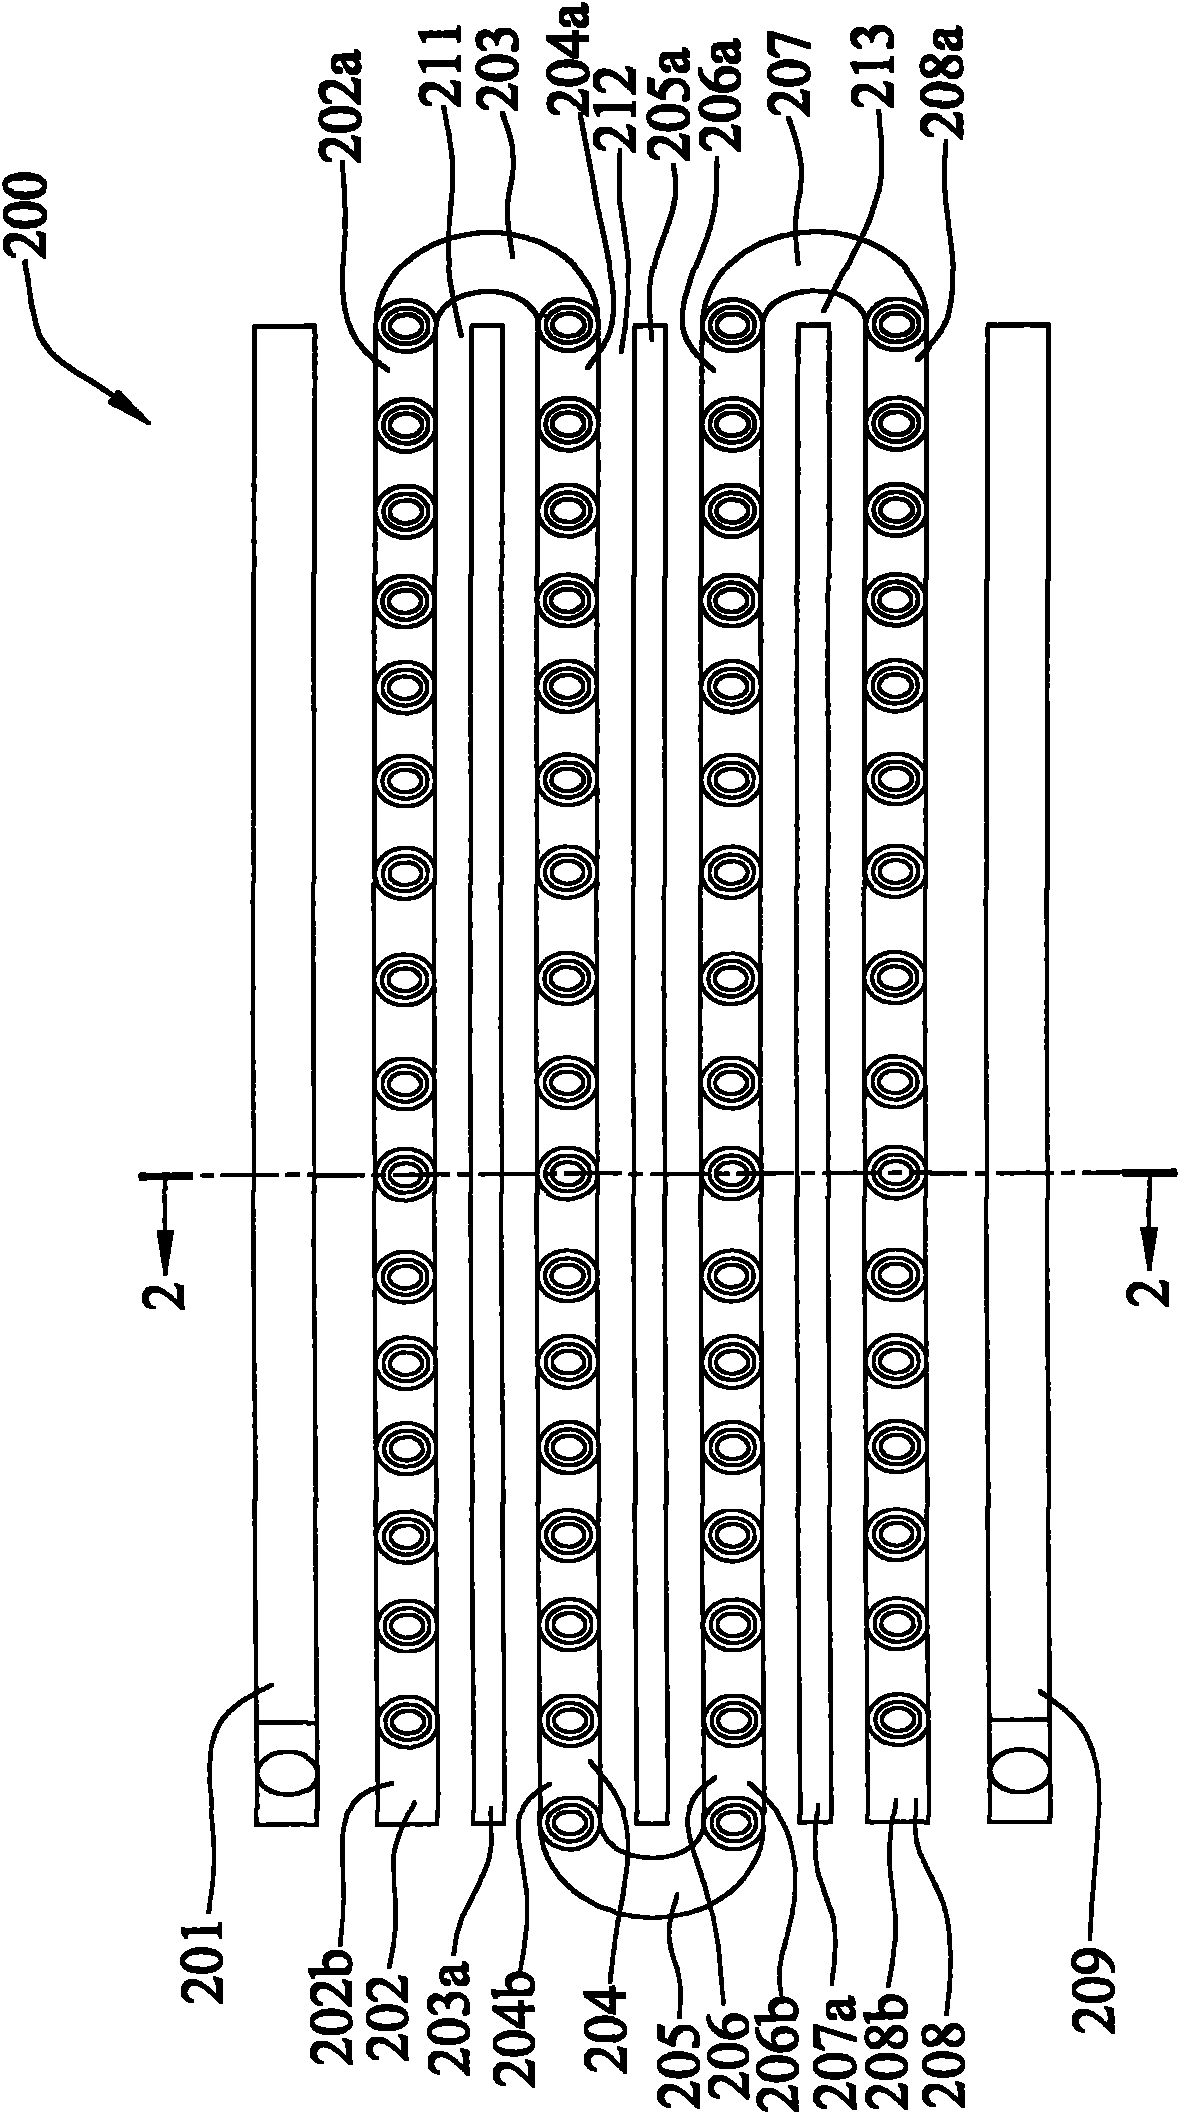 Circuit unit structure for process monitoring